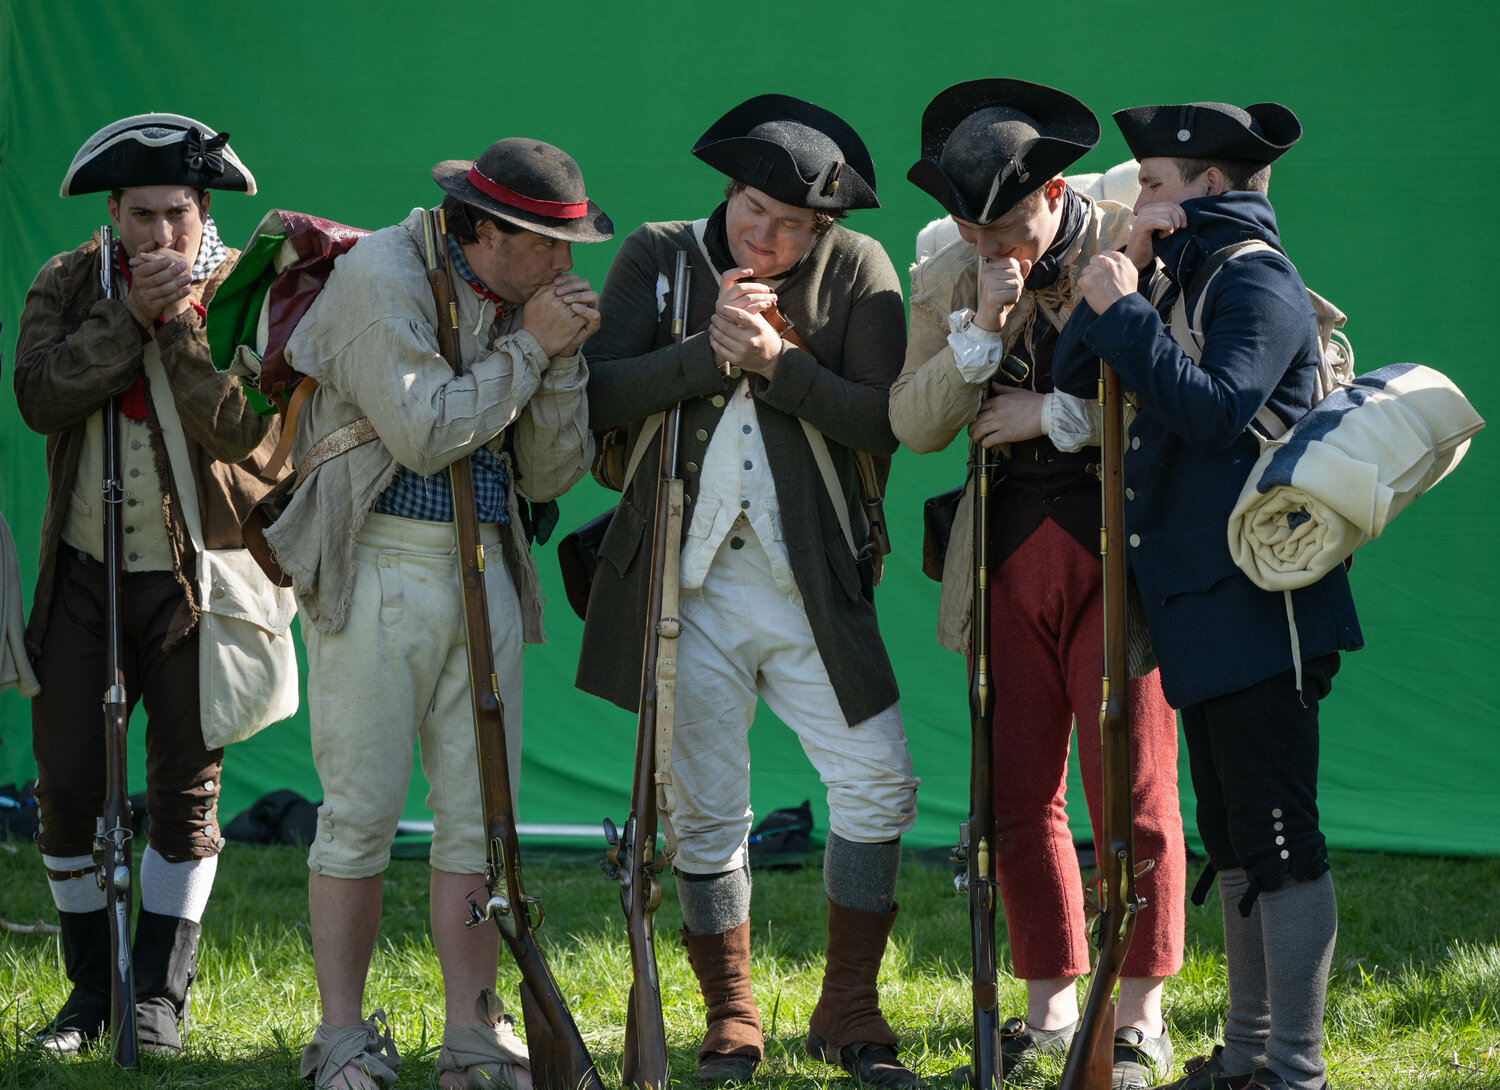 Actors try to look cold while filming a winter scene in front of a green screne on a mild mid-April afternoon at Washington Crossing Historic Park.